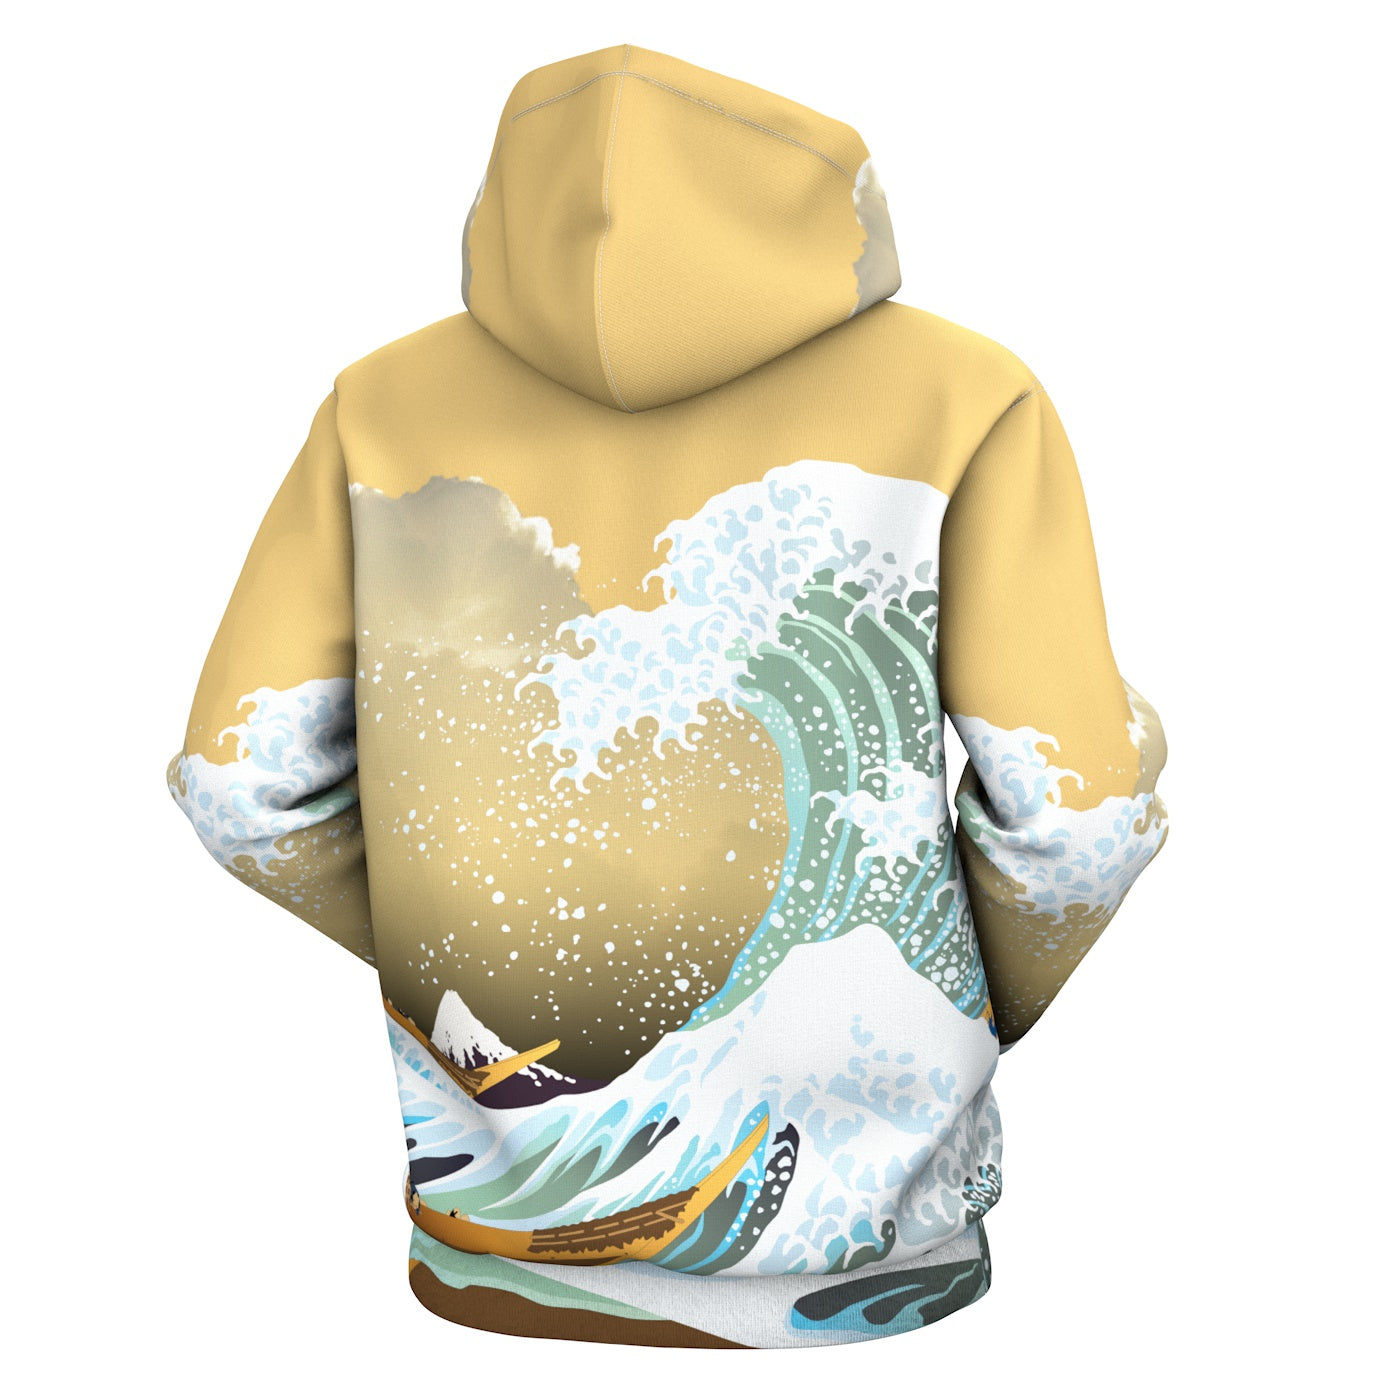 The Great Wave Hoodie